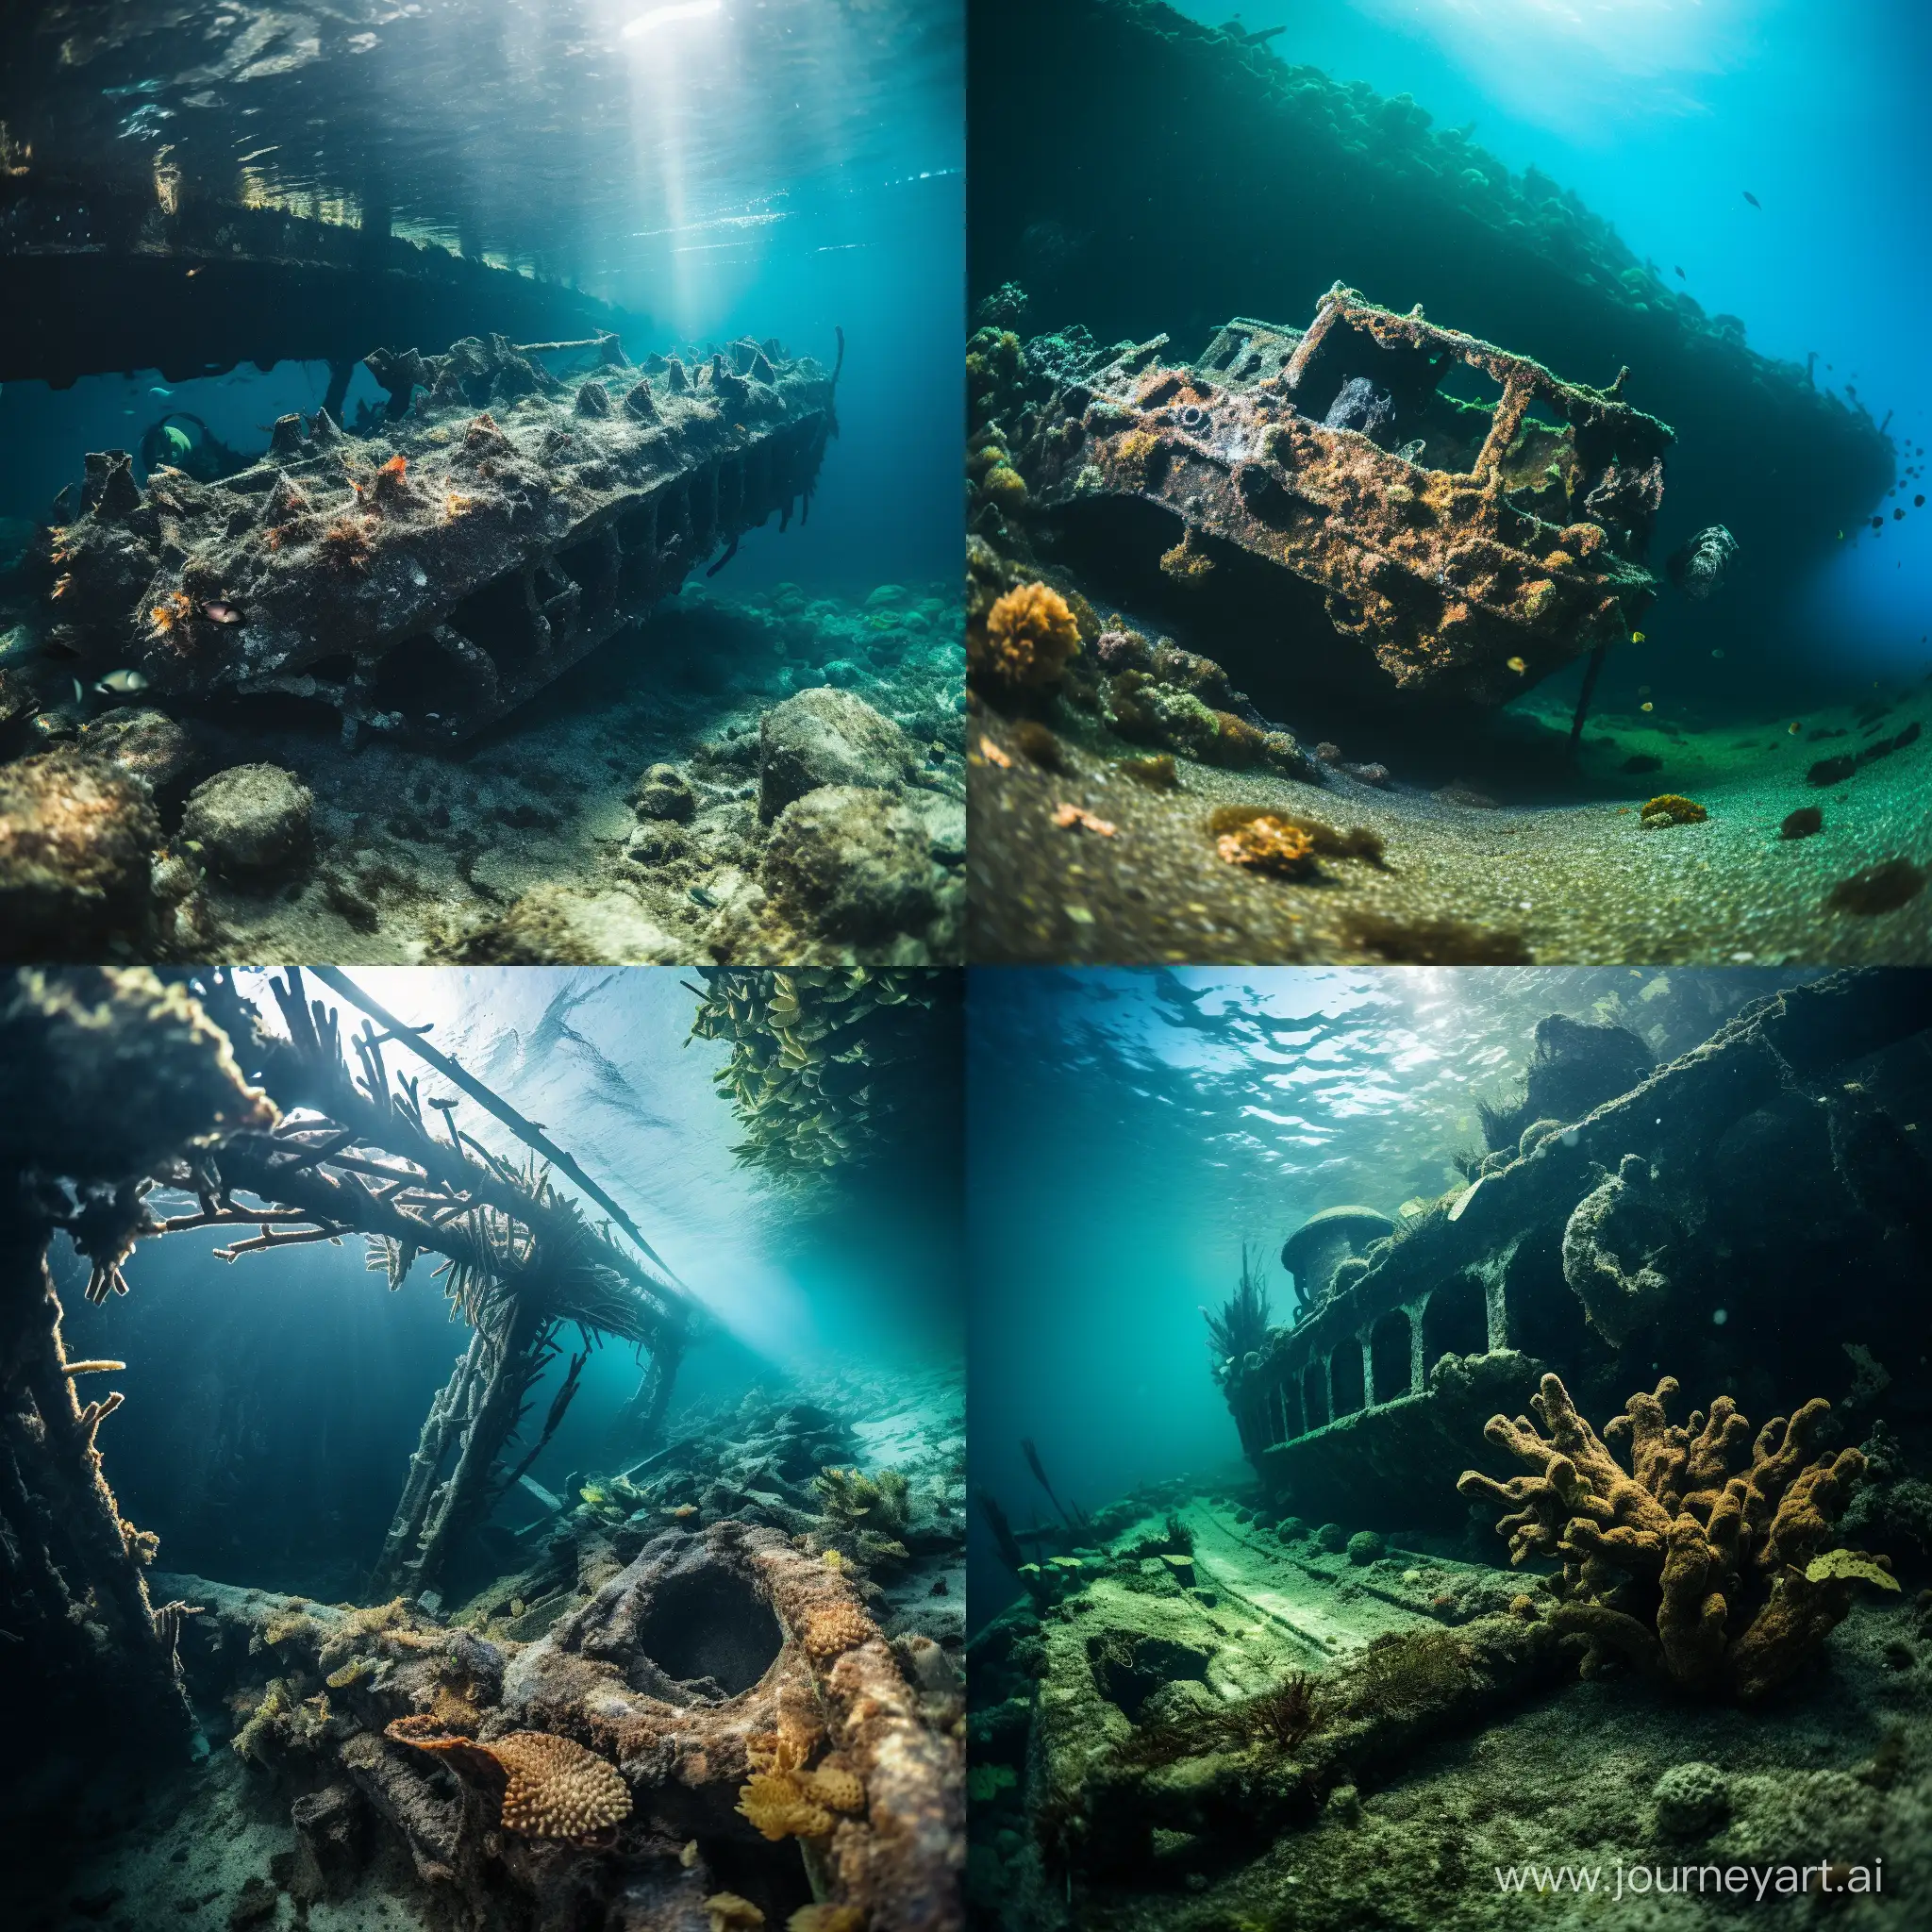 A photo of an ancient shipwreck nestled on the ocean floor. marine plants have claimed the wooden structure, and fish swim in and out of its hollow spaces. Sunken treasures and old cannons are scattered around, providing a glimpse into the past. taken with a canon camera, 25mm lens